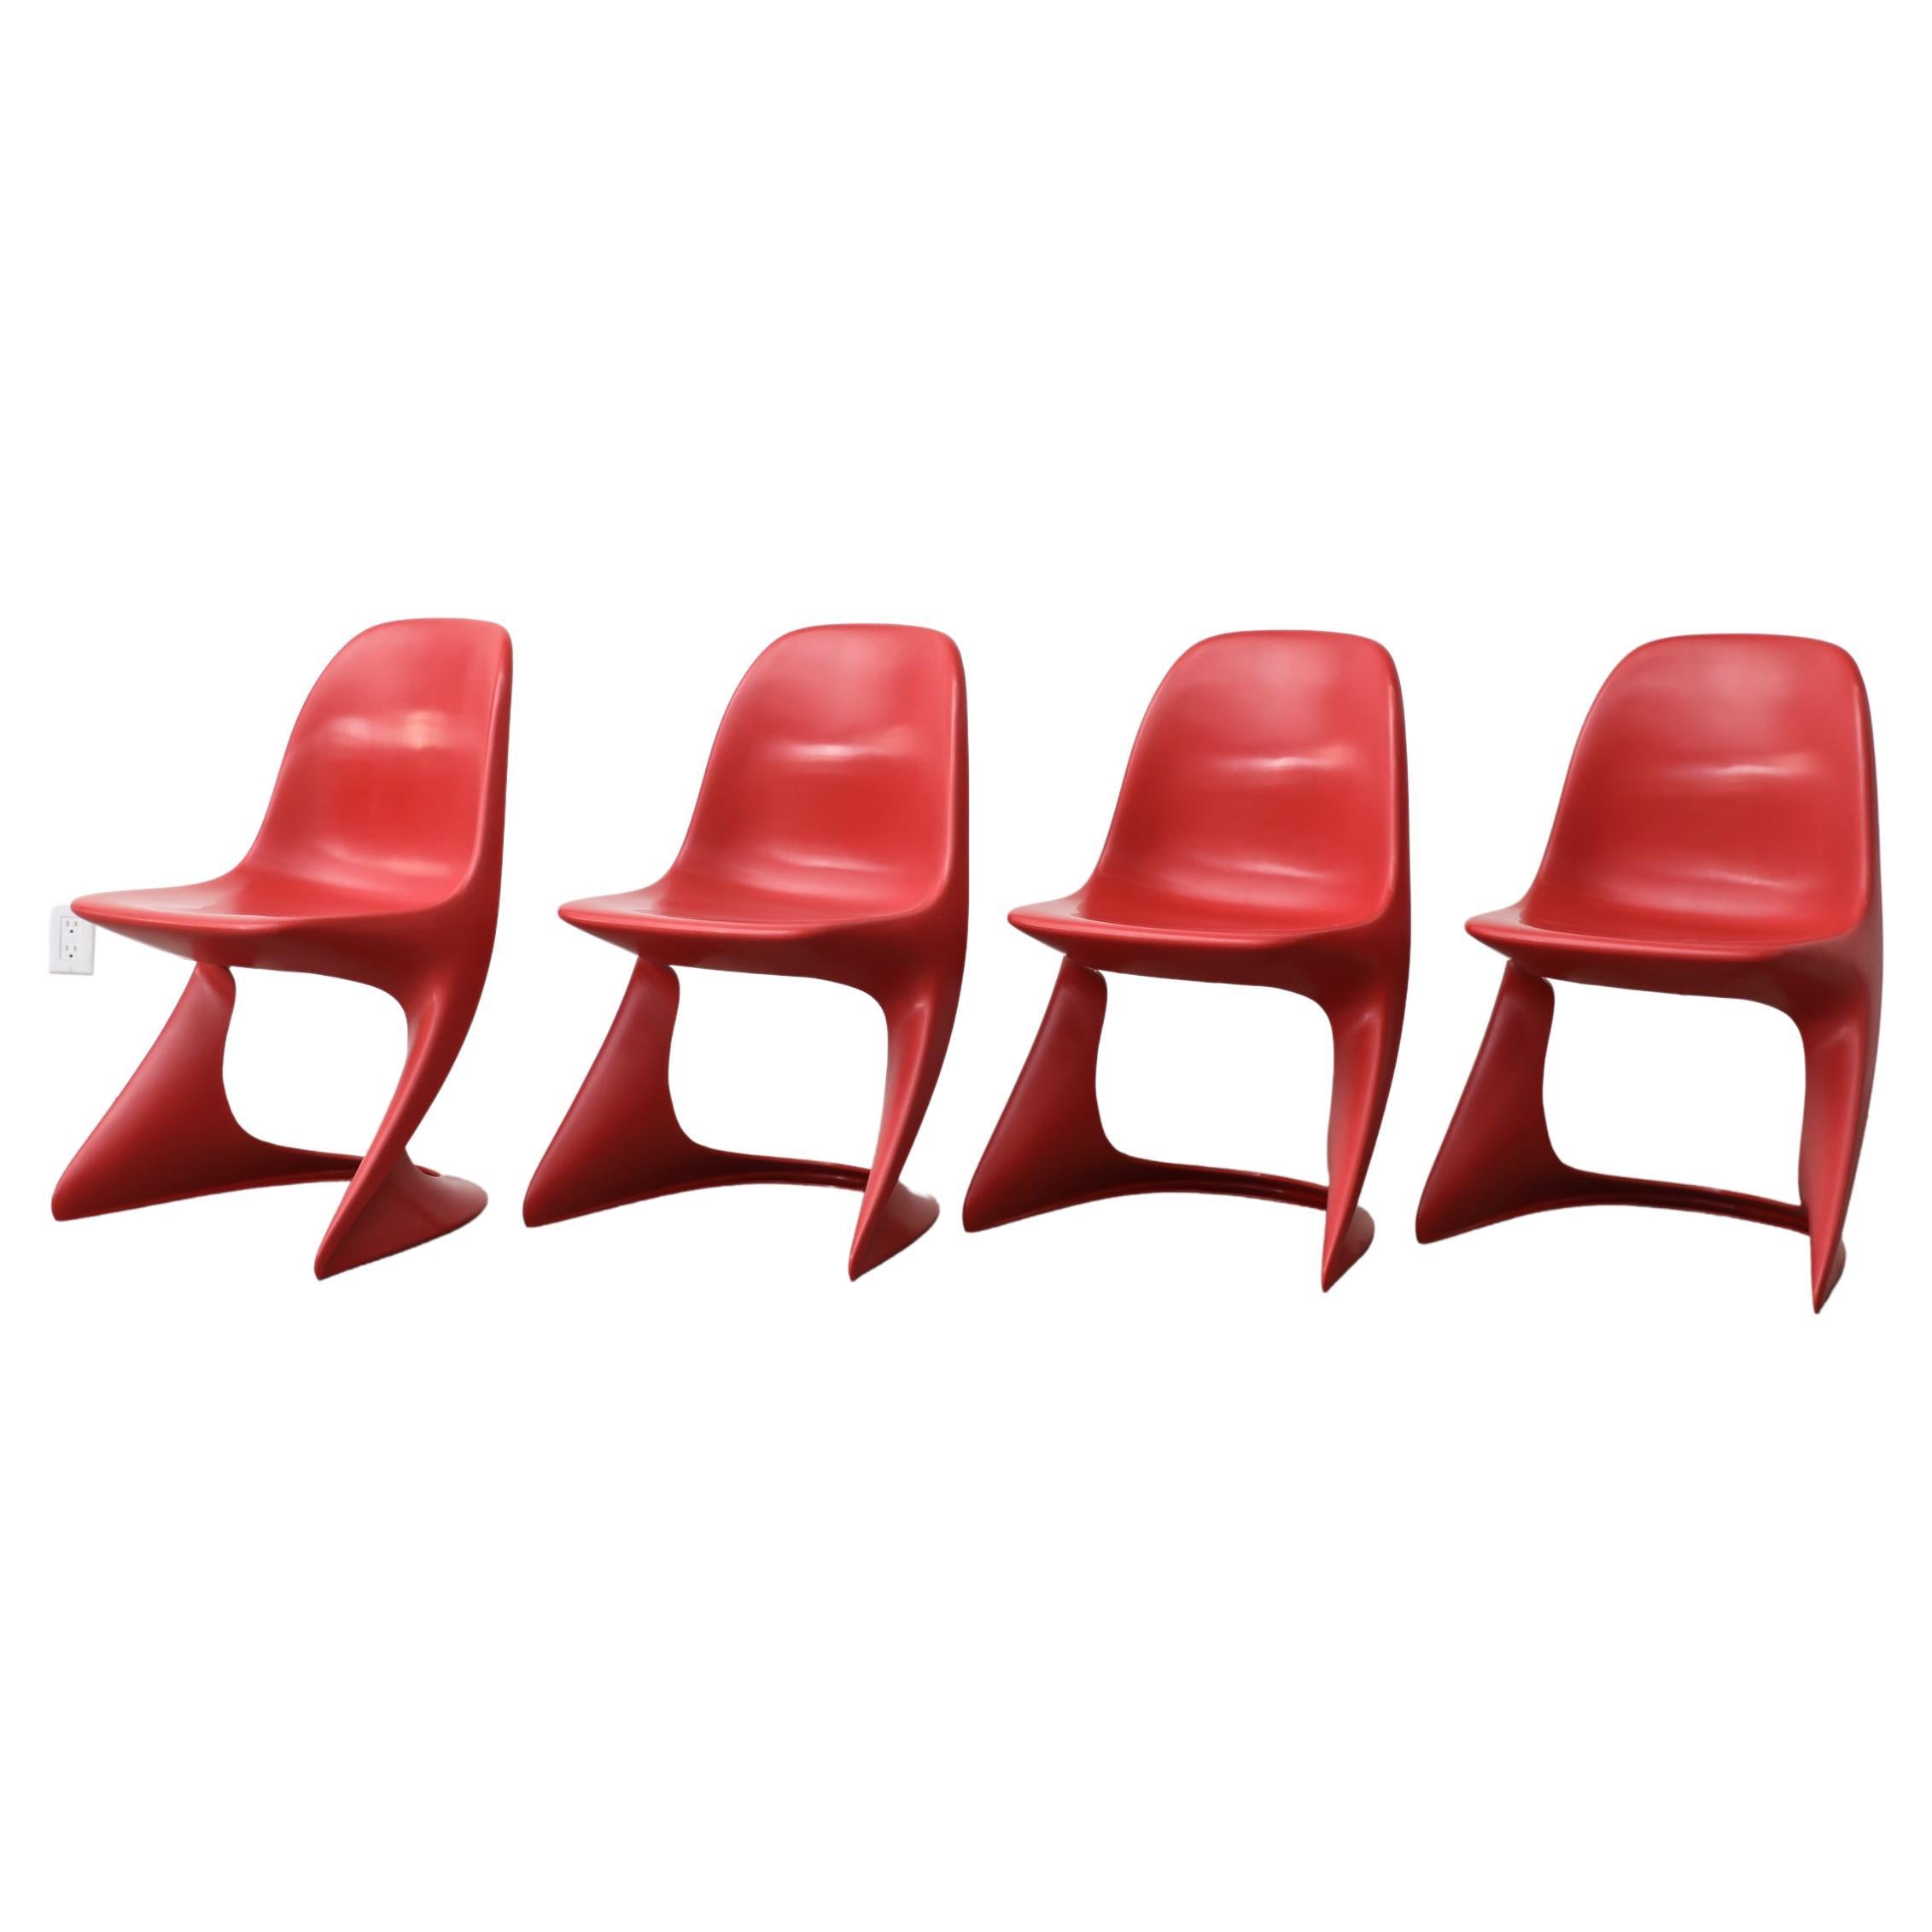 Set of 4 Space Age Stacking Child Sized Red Casalino Chairs by Alexander Begge